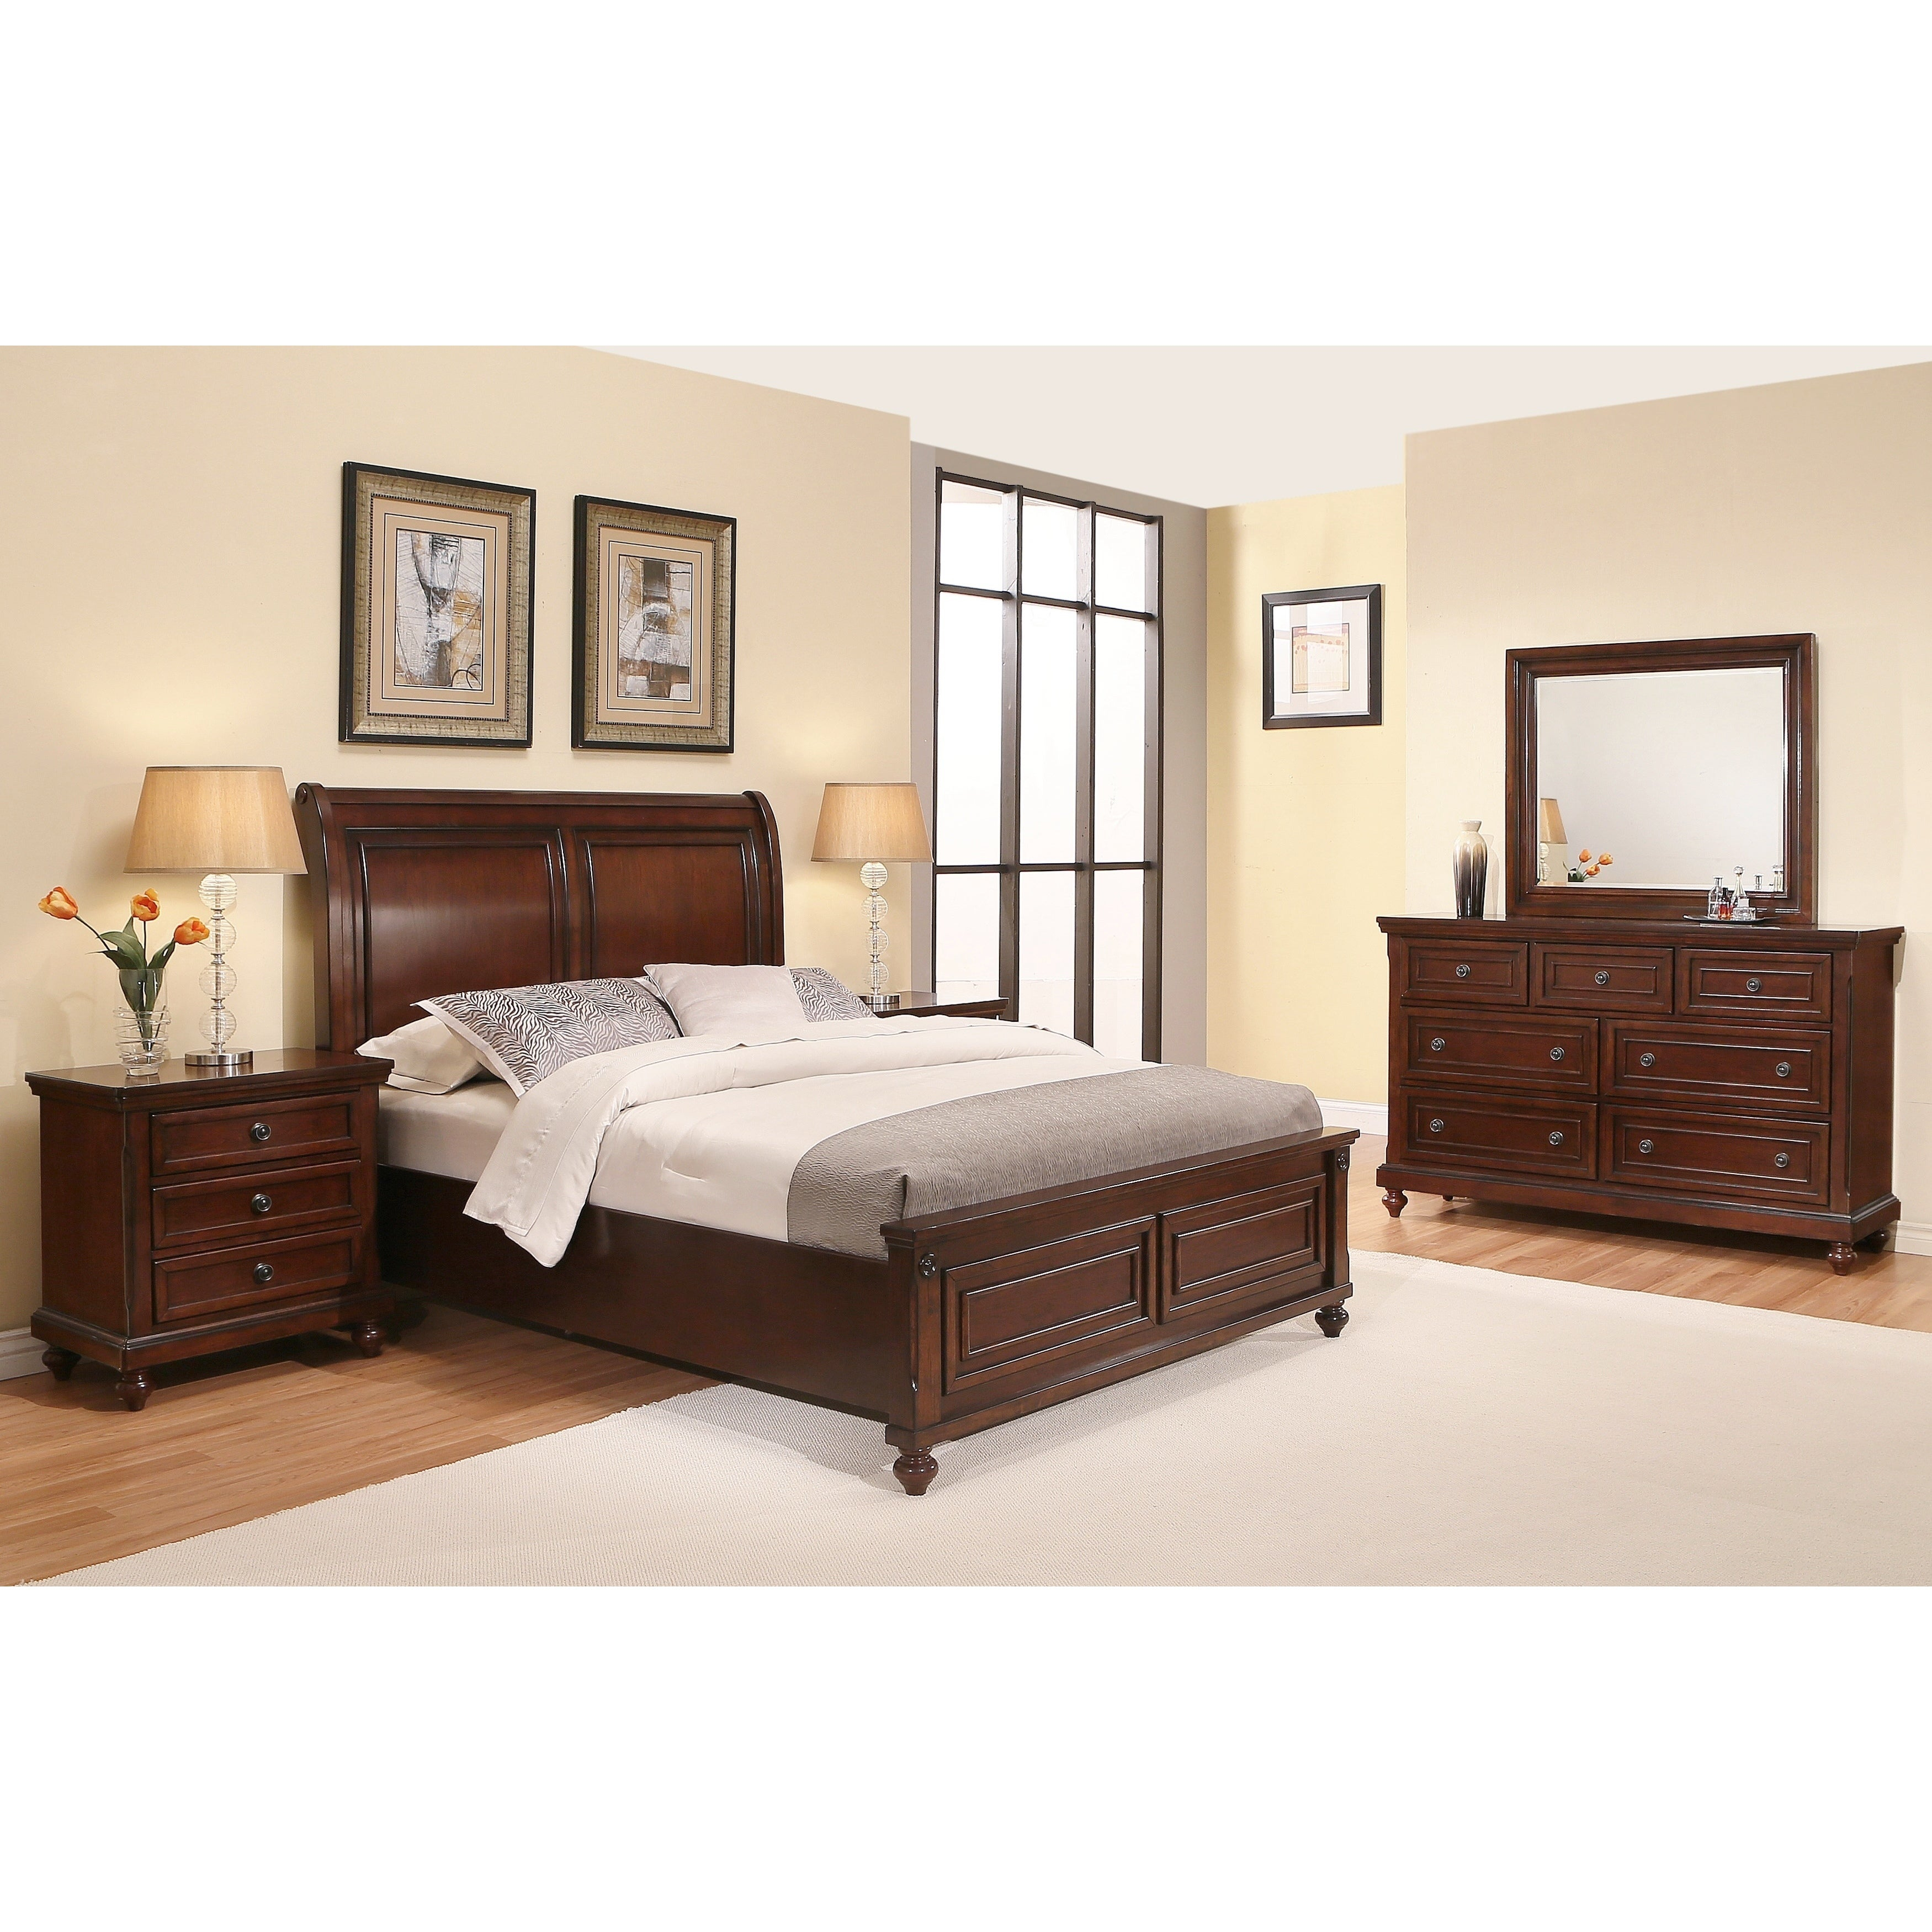 Abson Caprice Cherry Wood Bedroom Set 5 Piece intended for measurements 3500 X 3500